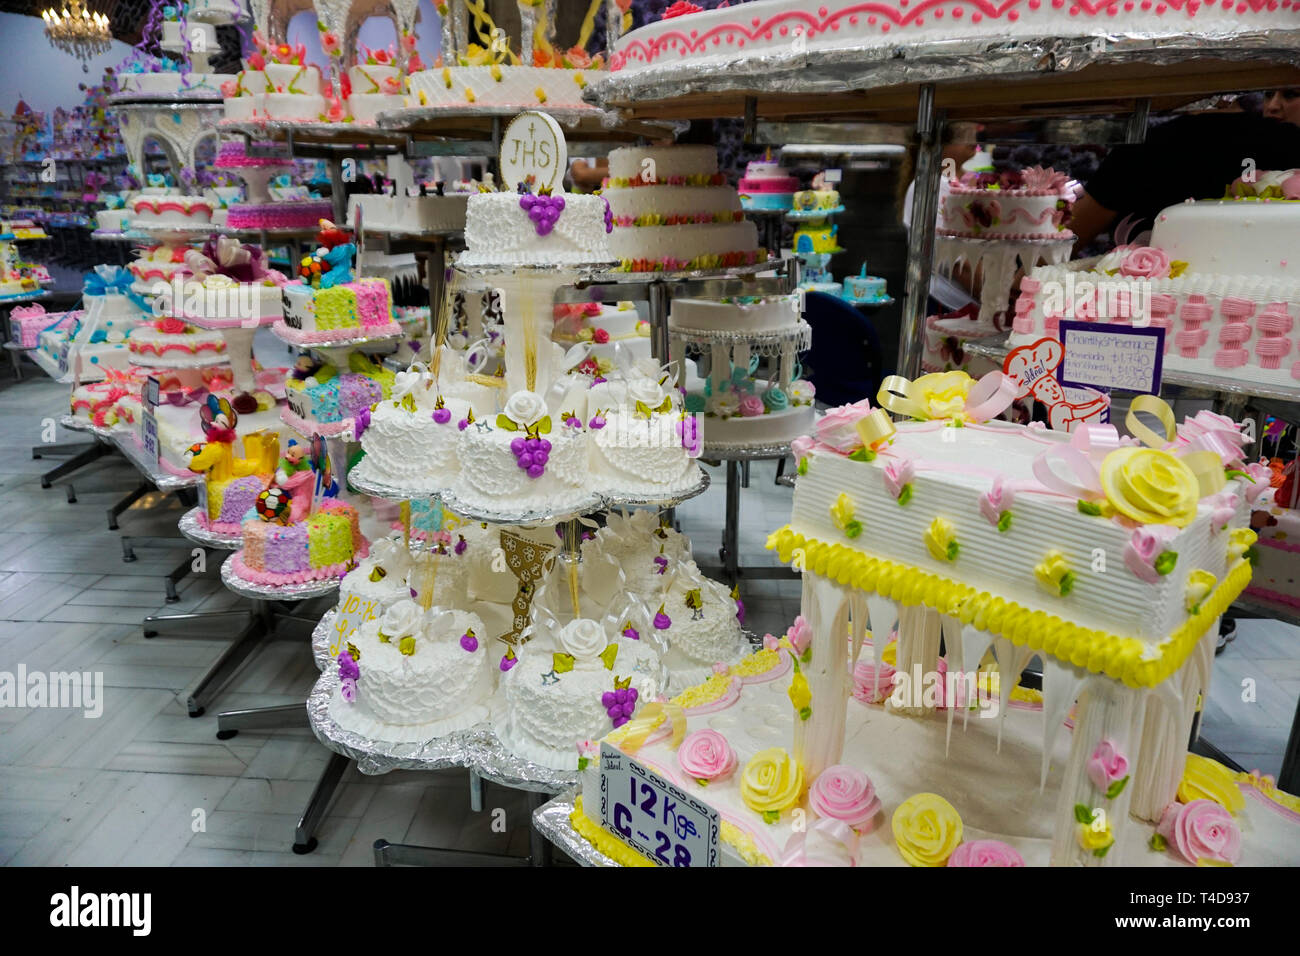 Party Cakes At Pasteleria Ideal Bakery In Mexico City Mexico Stock Photo Alamy